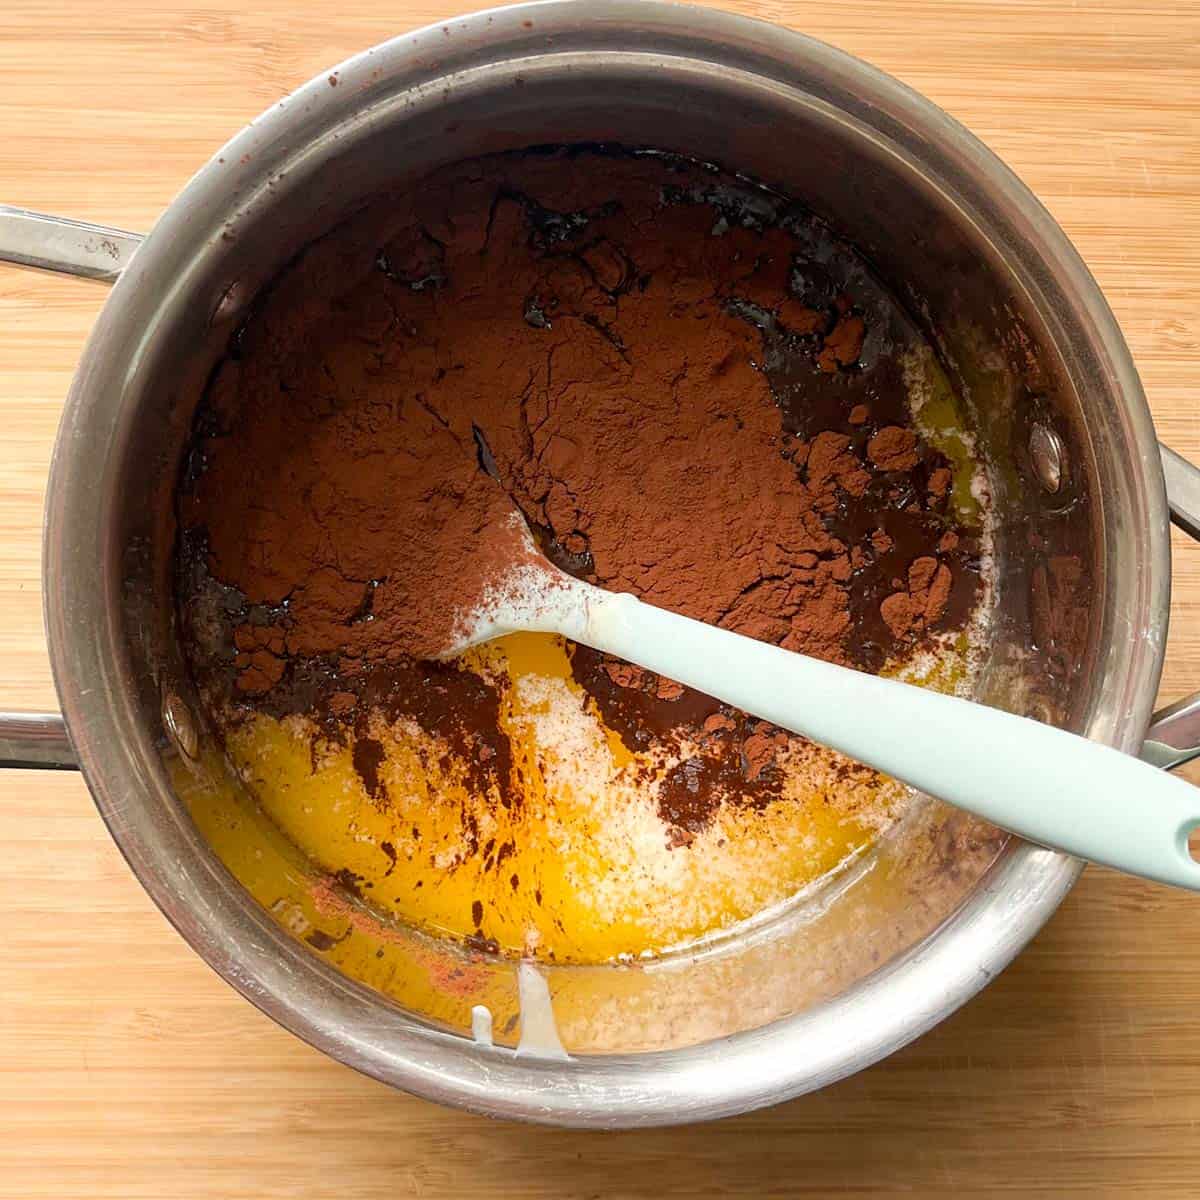 Cocoa powder added to melted butter in a small saucepan.